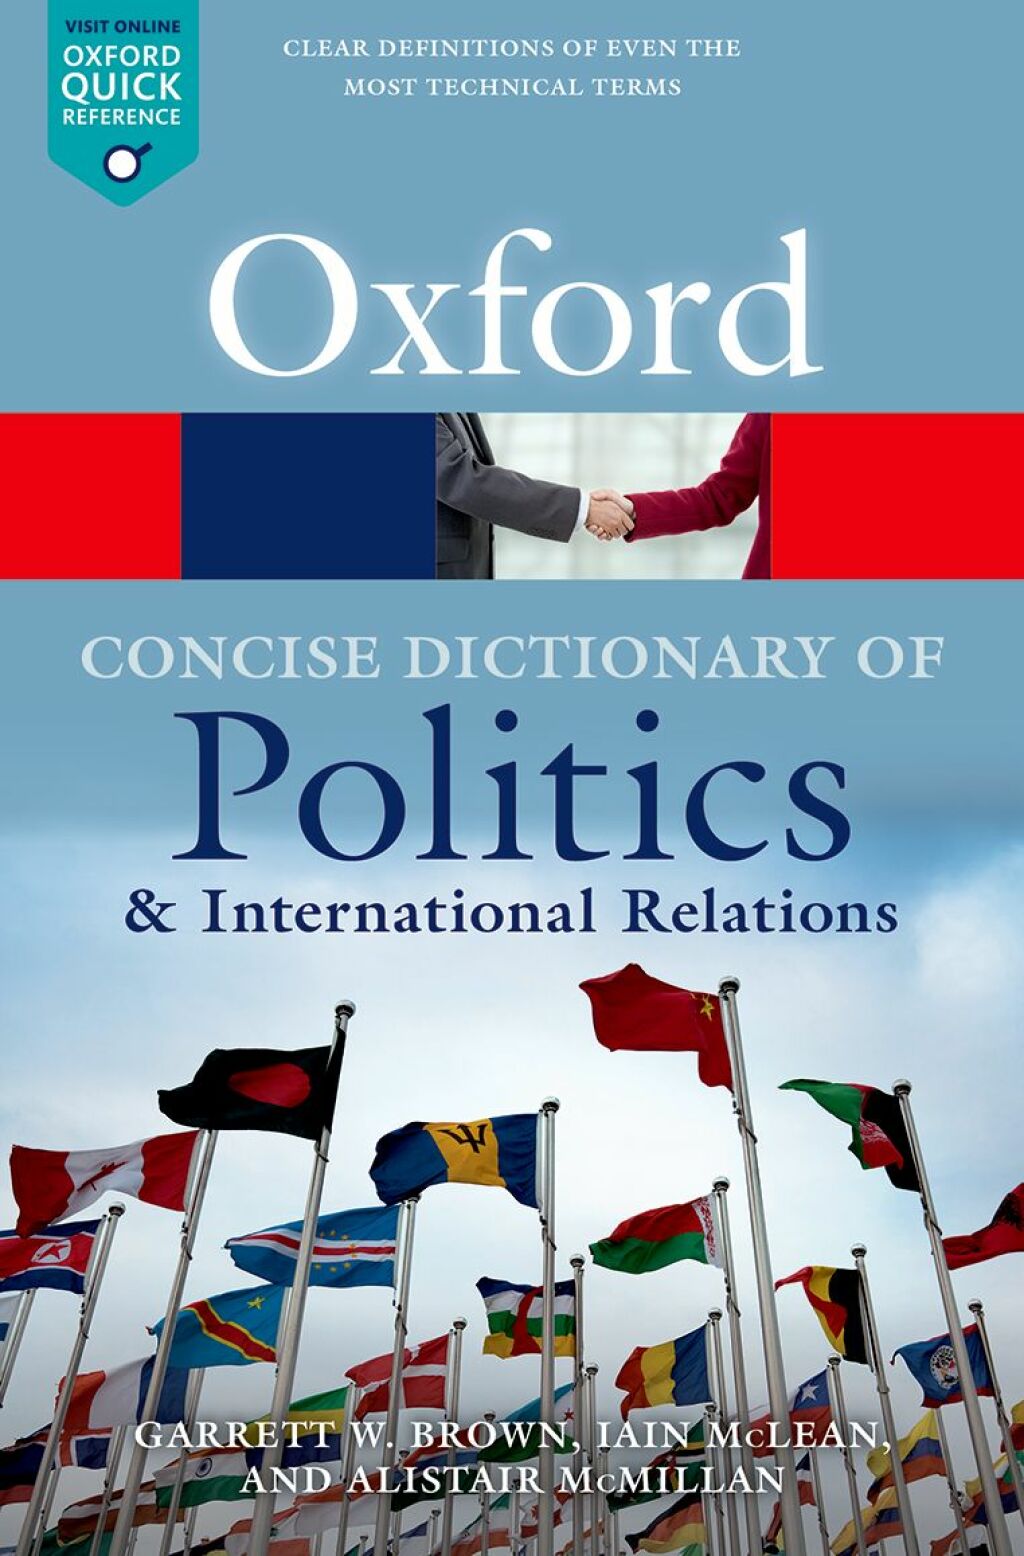 ISBN 9780199670840 product image for The Concise Oxford Dictionary of Politics and International Relations - 4th Edit | upcitemdb.com